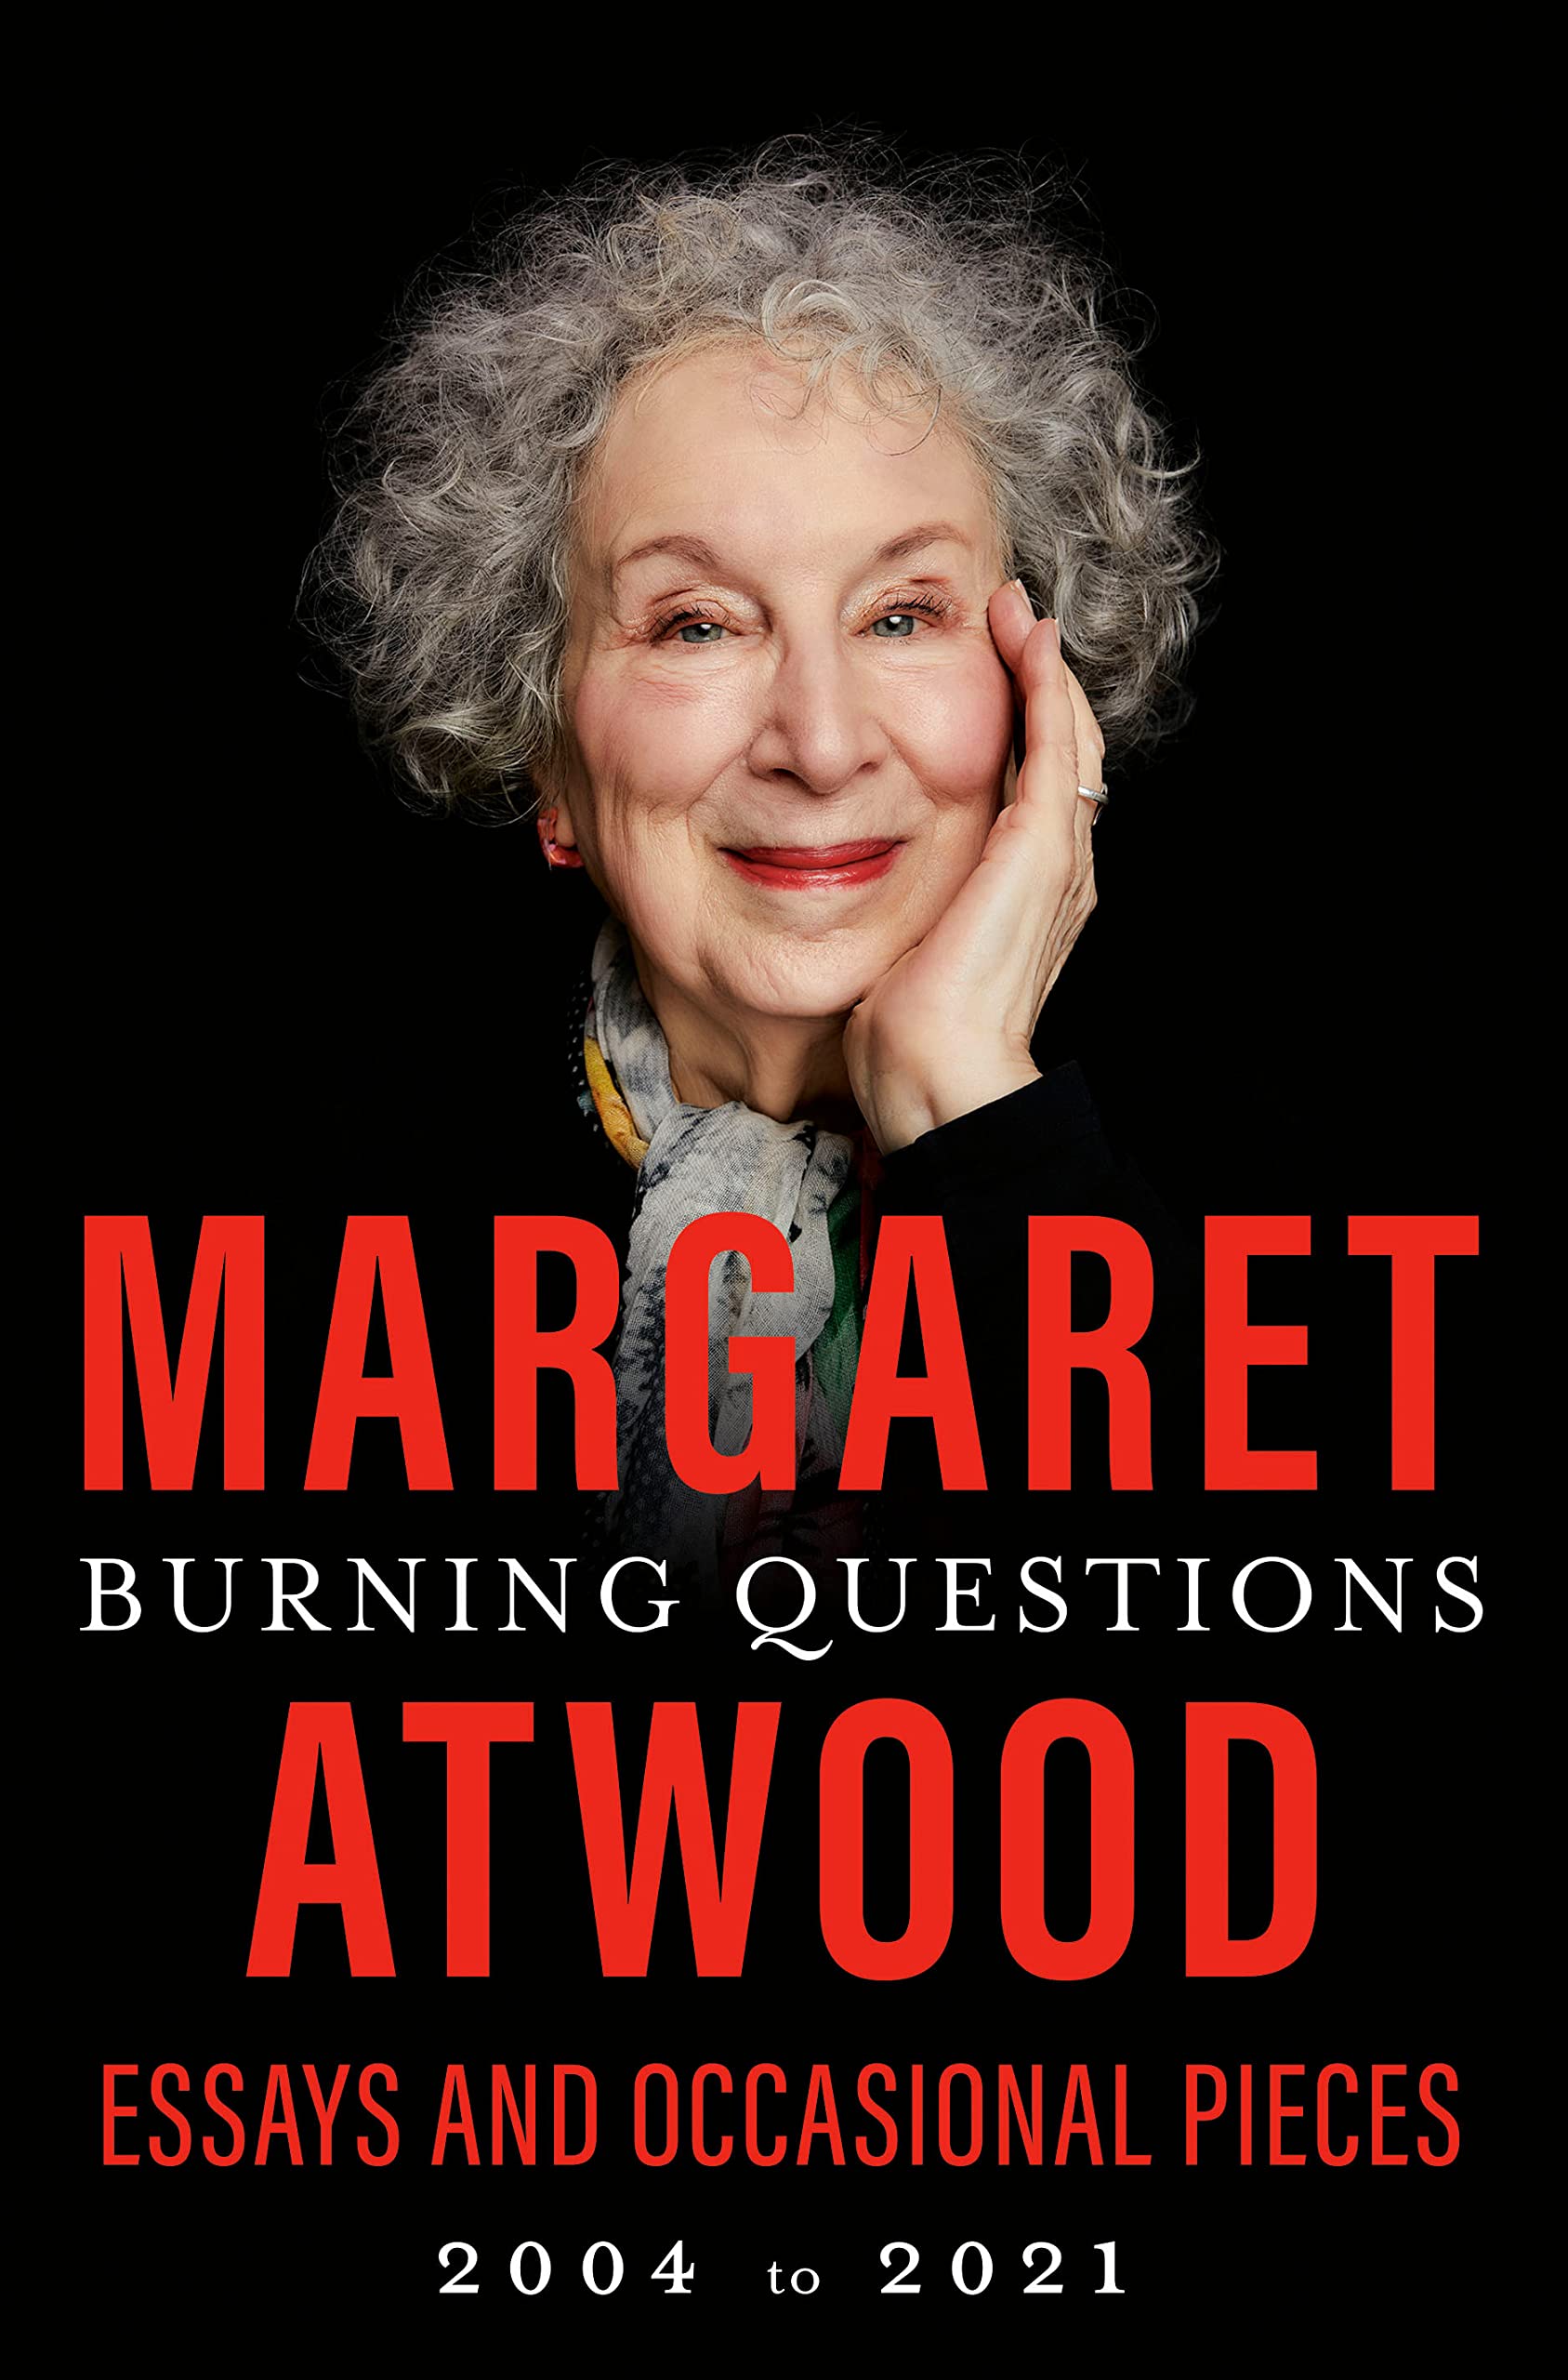 Burning Questions: Essays and Occasional Pieces, 2004 to 2021 (Hardcover)